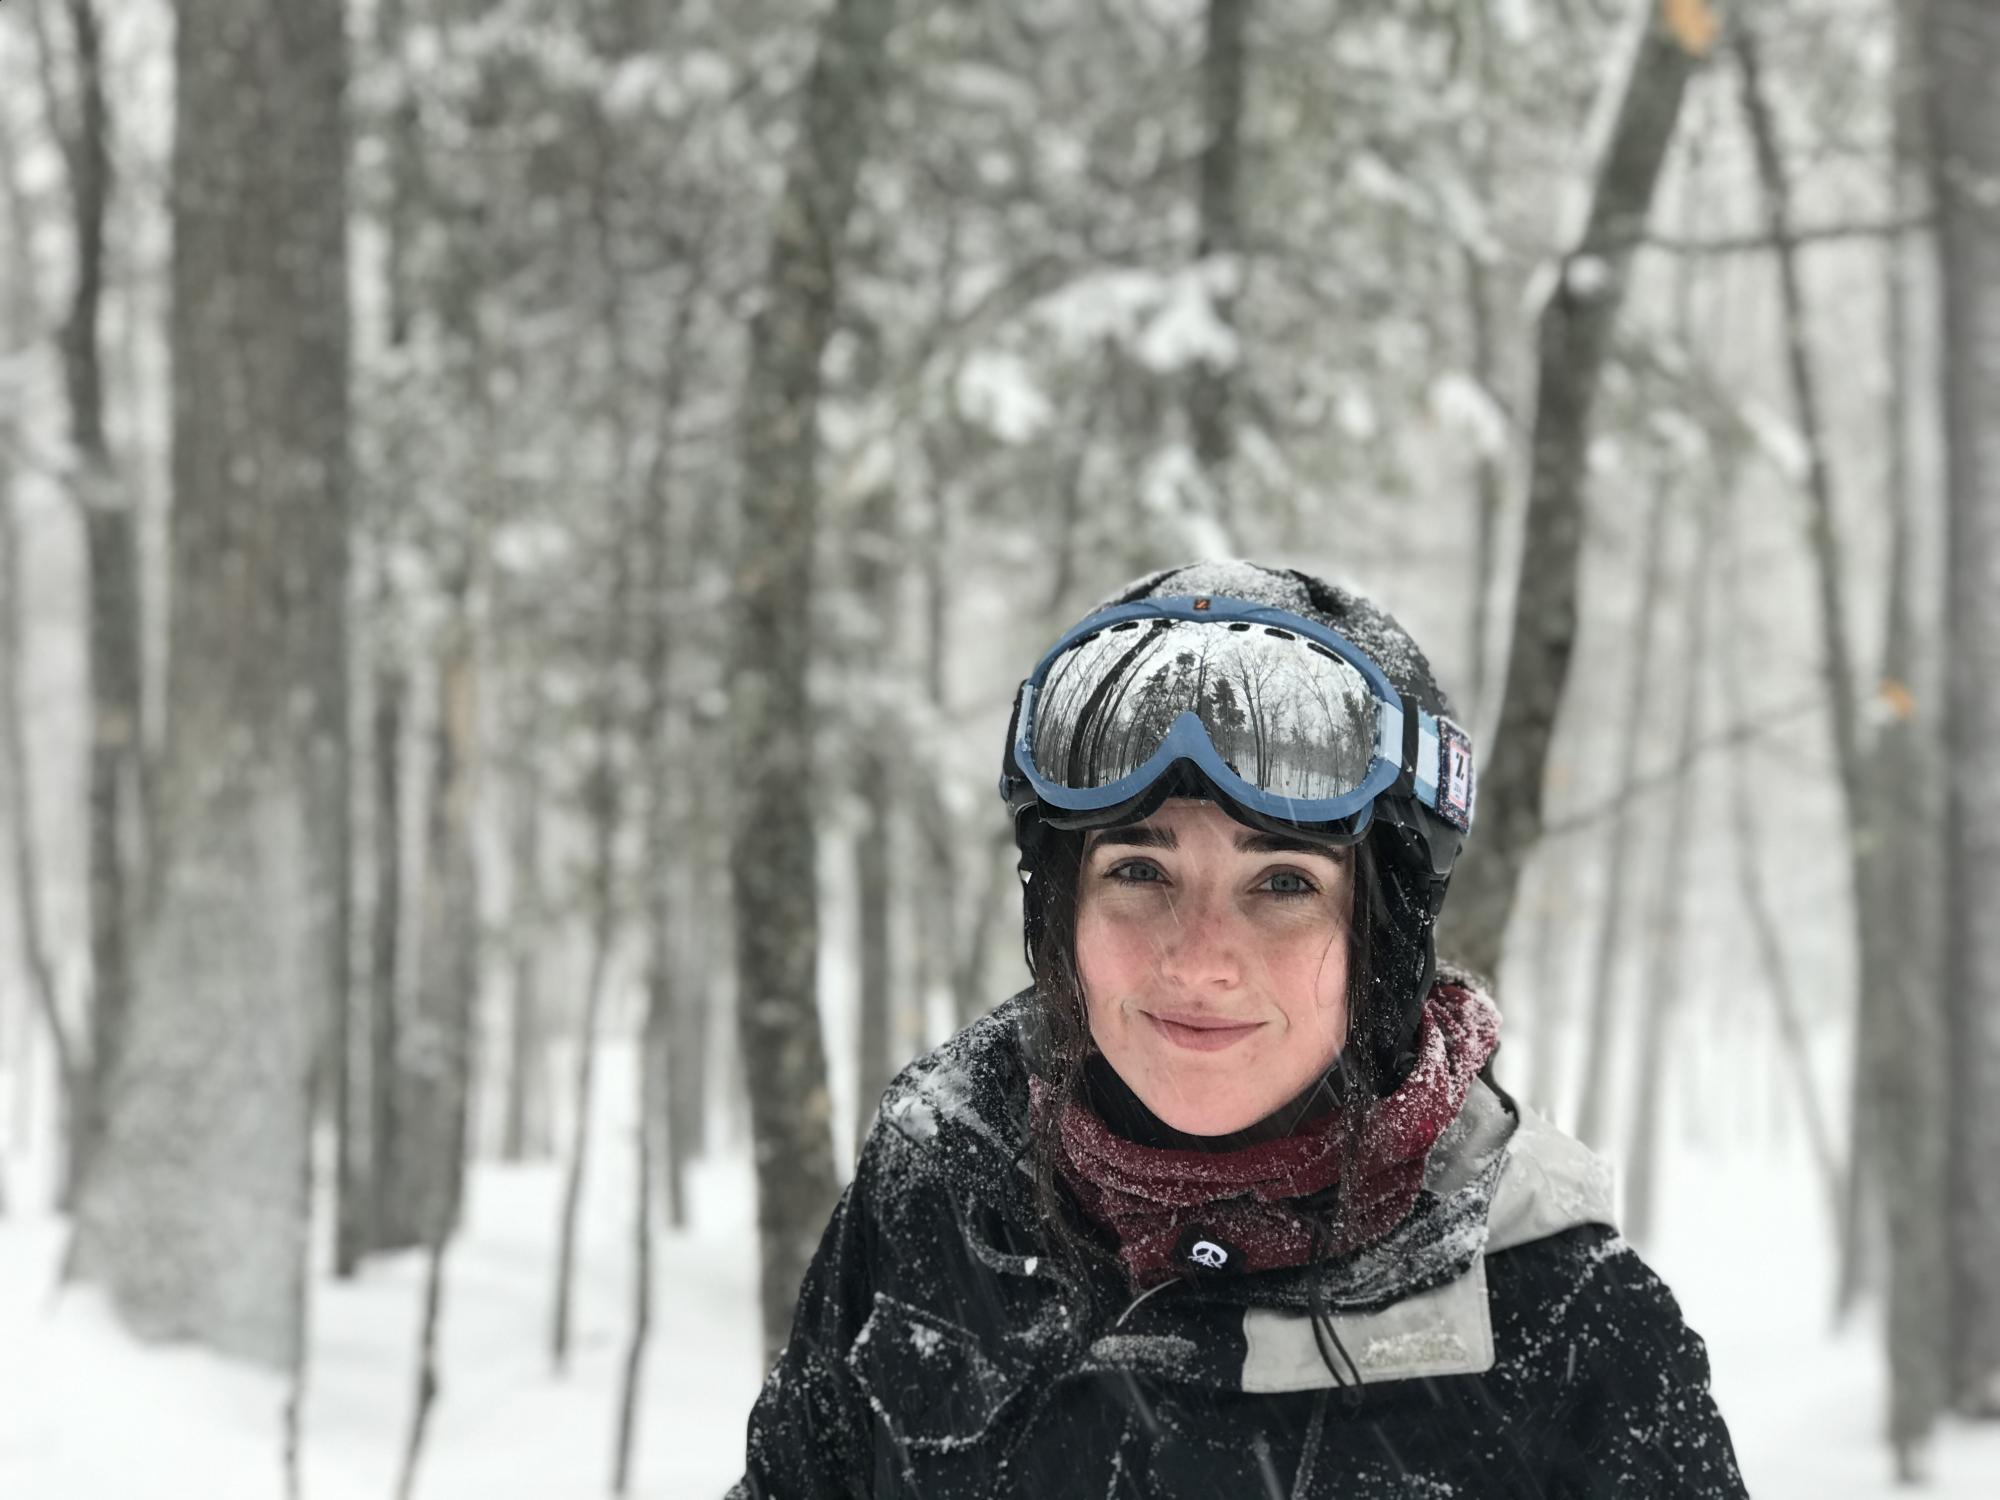 Analise with a ski helmet on